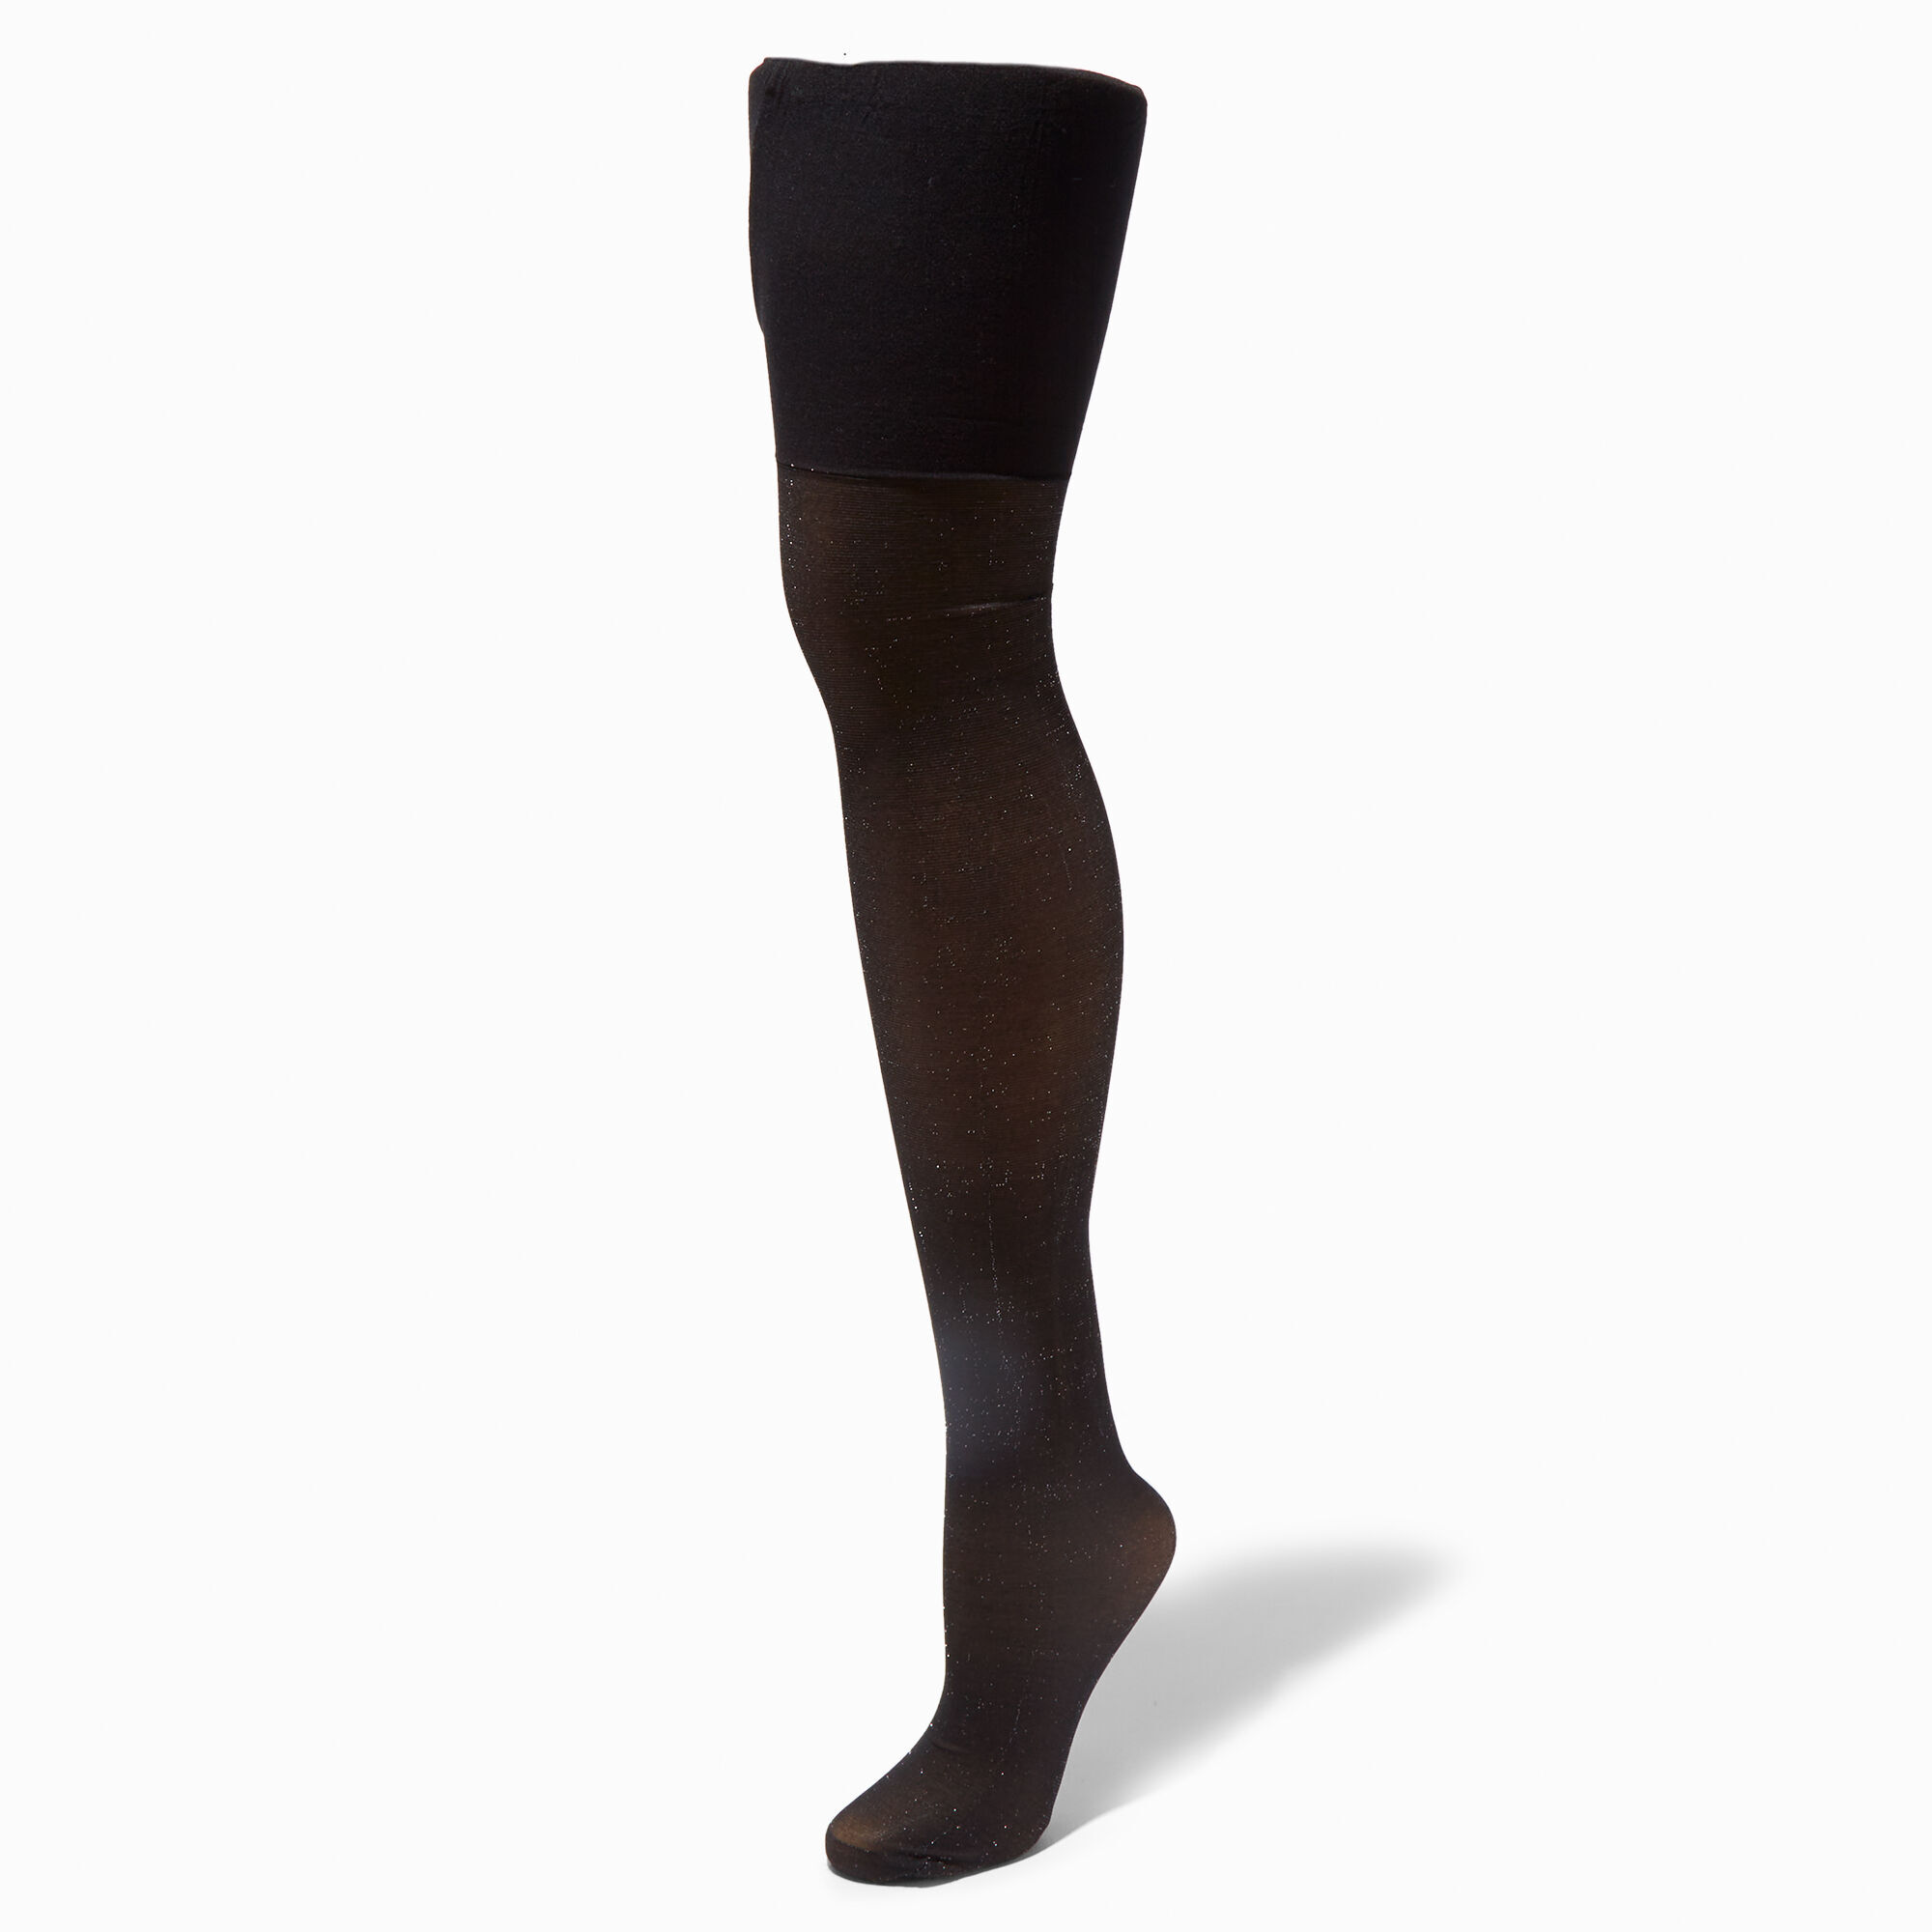 View Claires Shimmer Tights Ml Black information